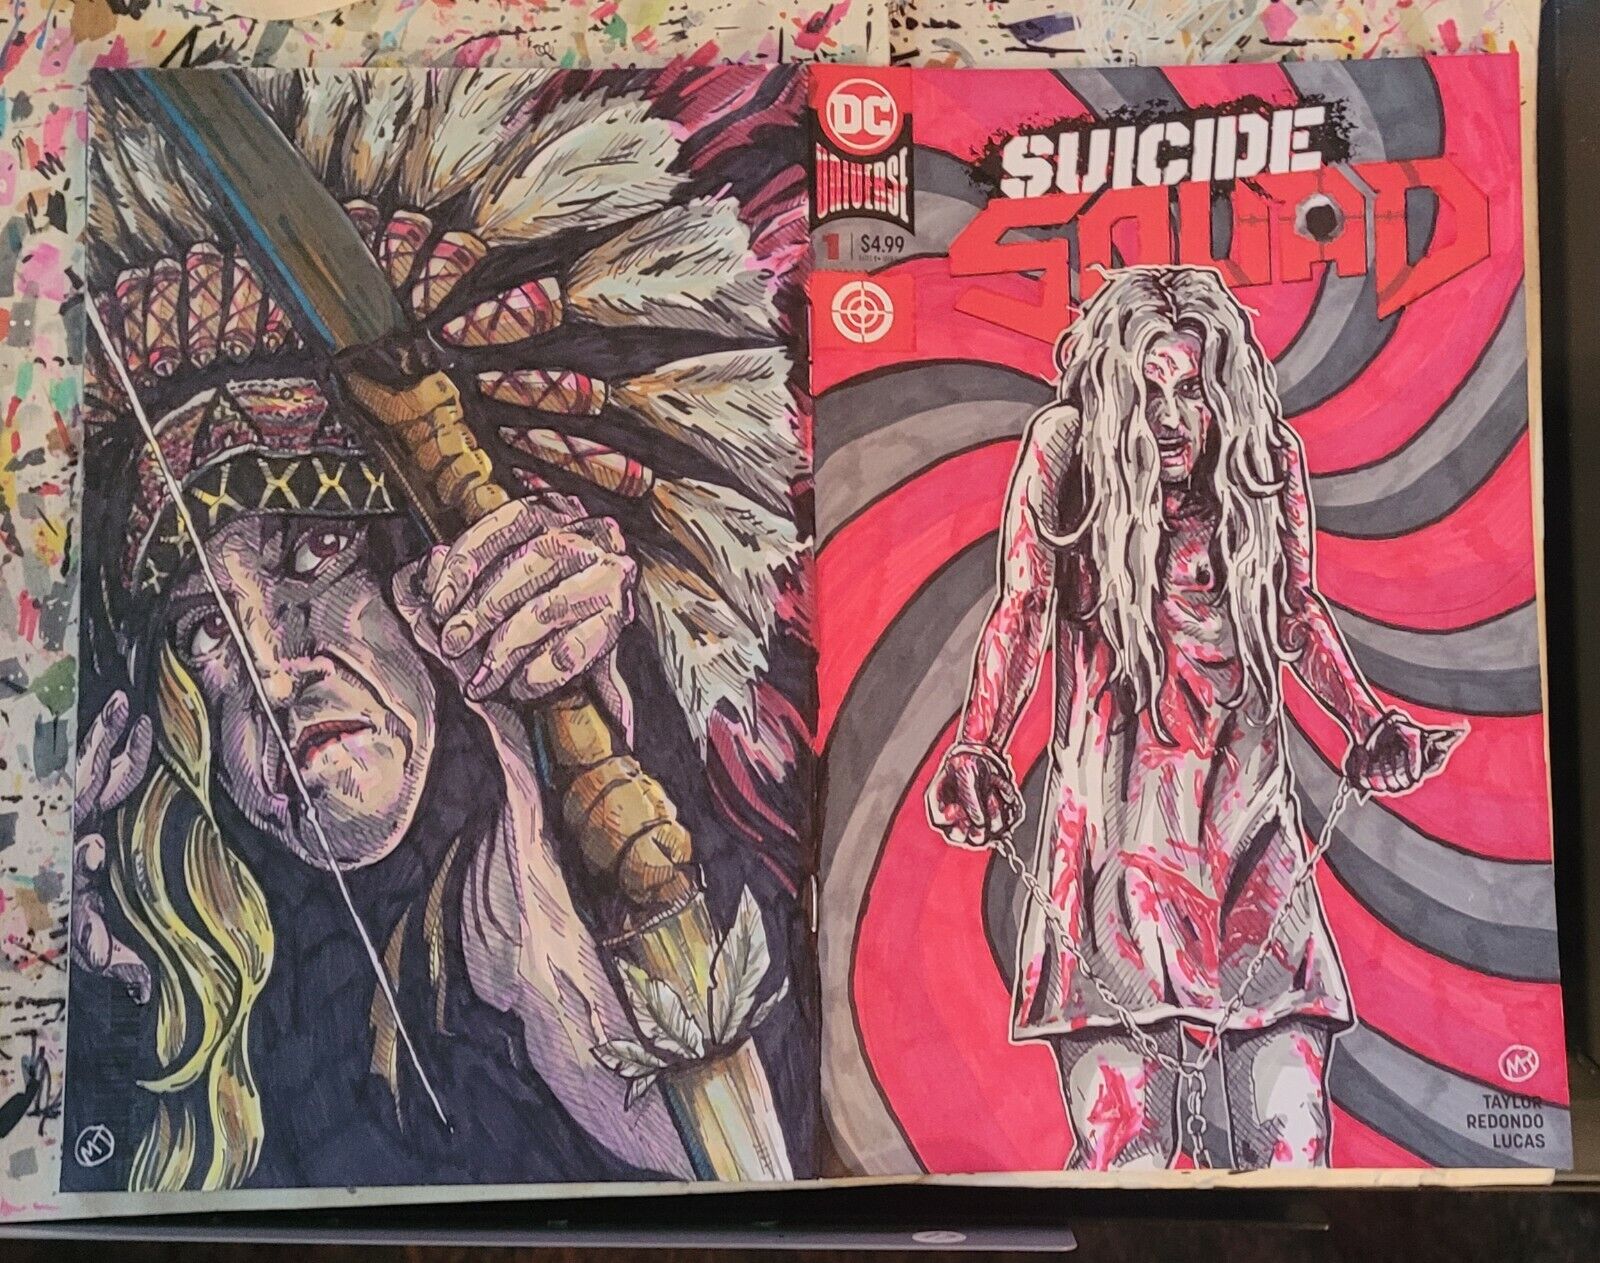 Suicide Squad #1 Blank var. w original artwork of Sherri Moon Zombie 3 from hell